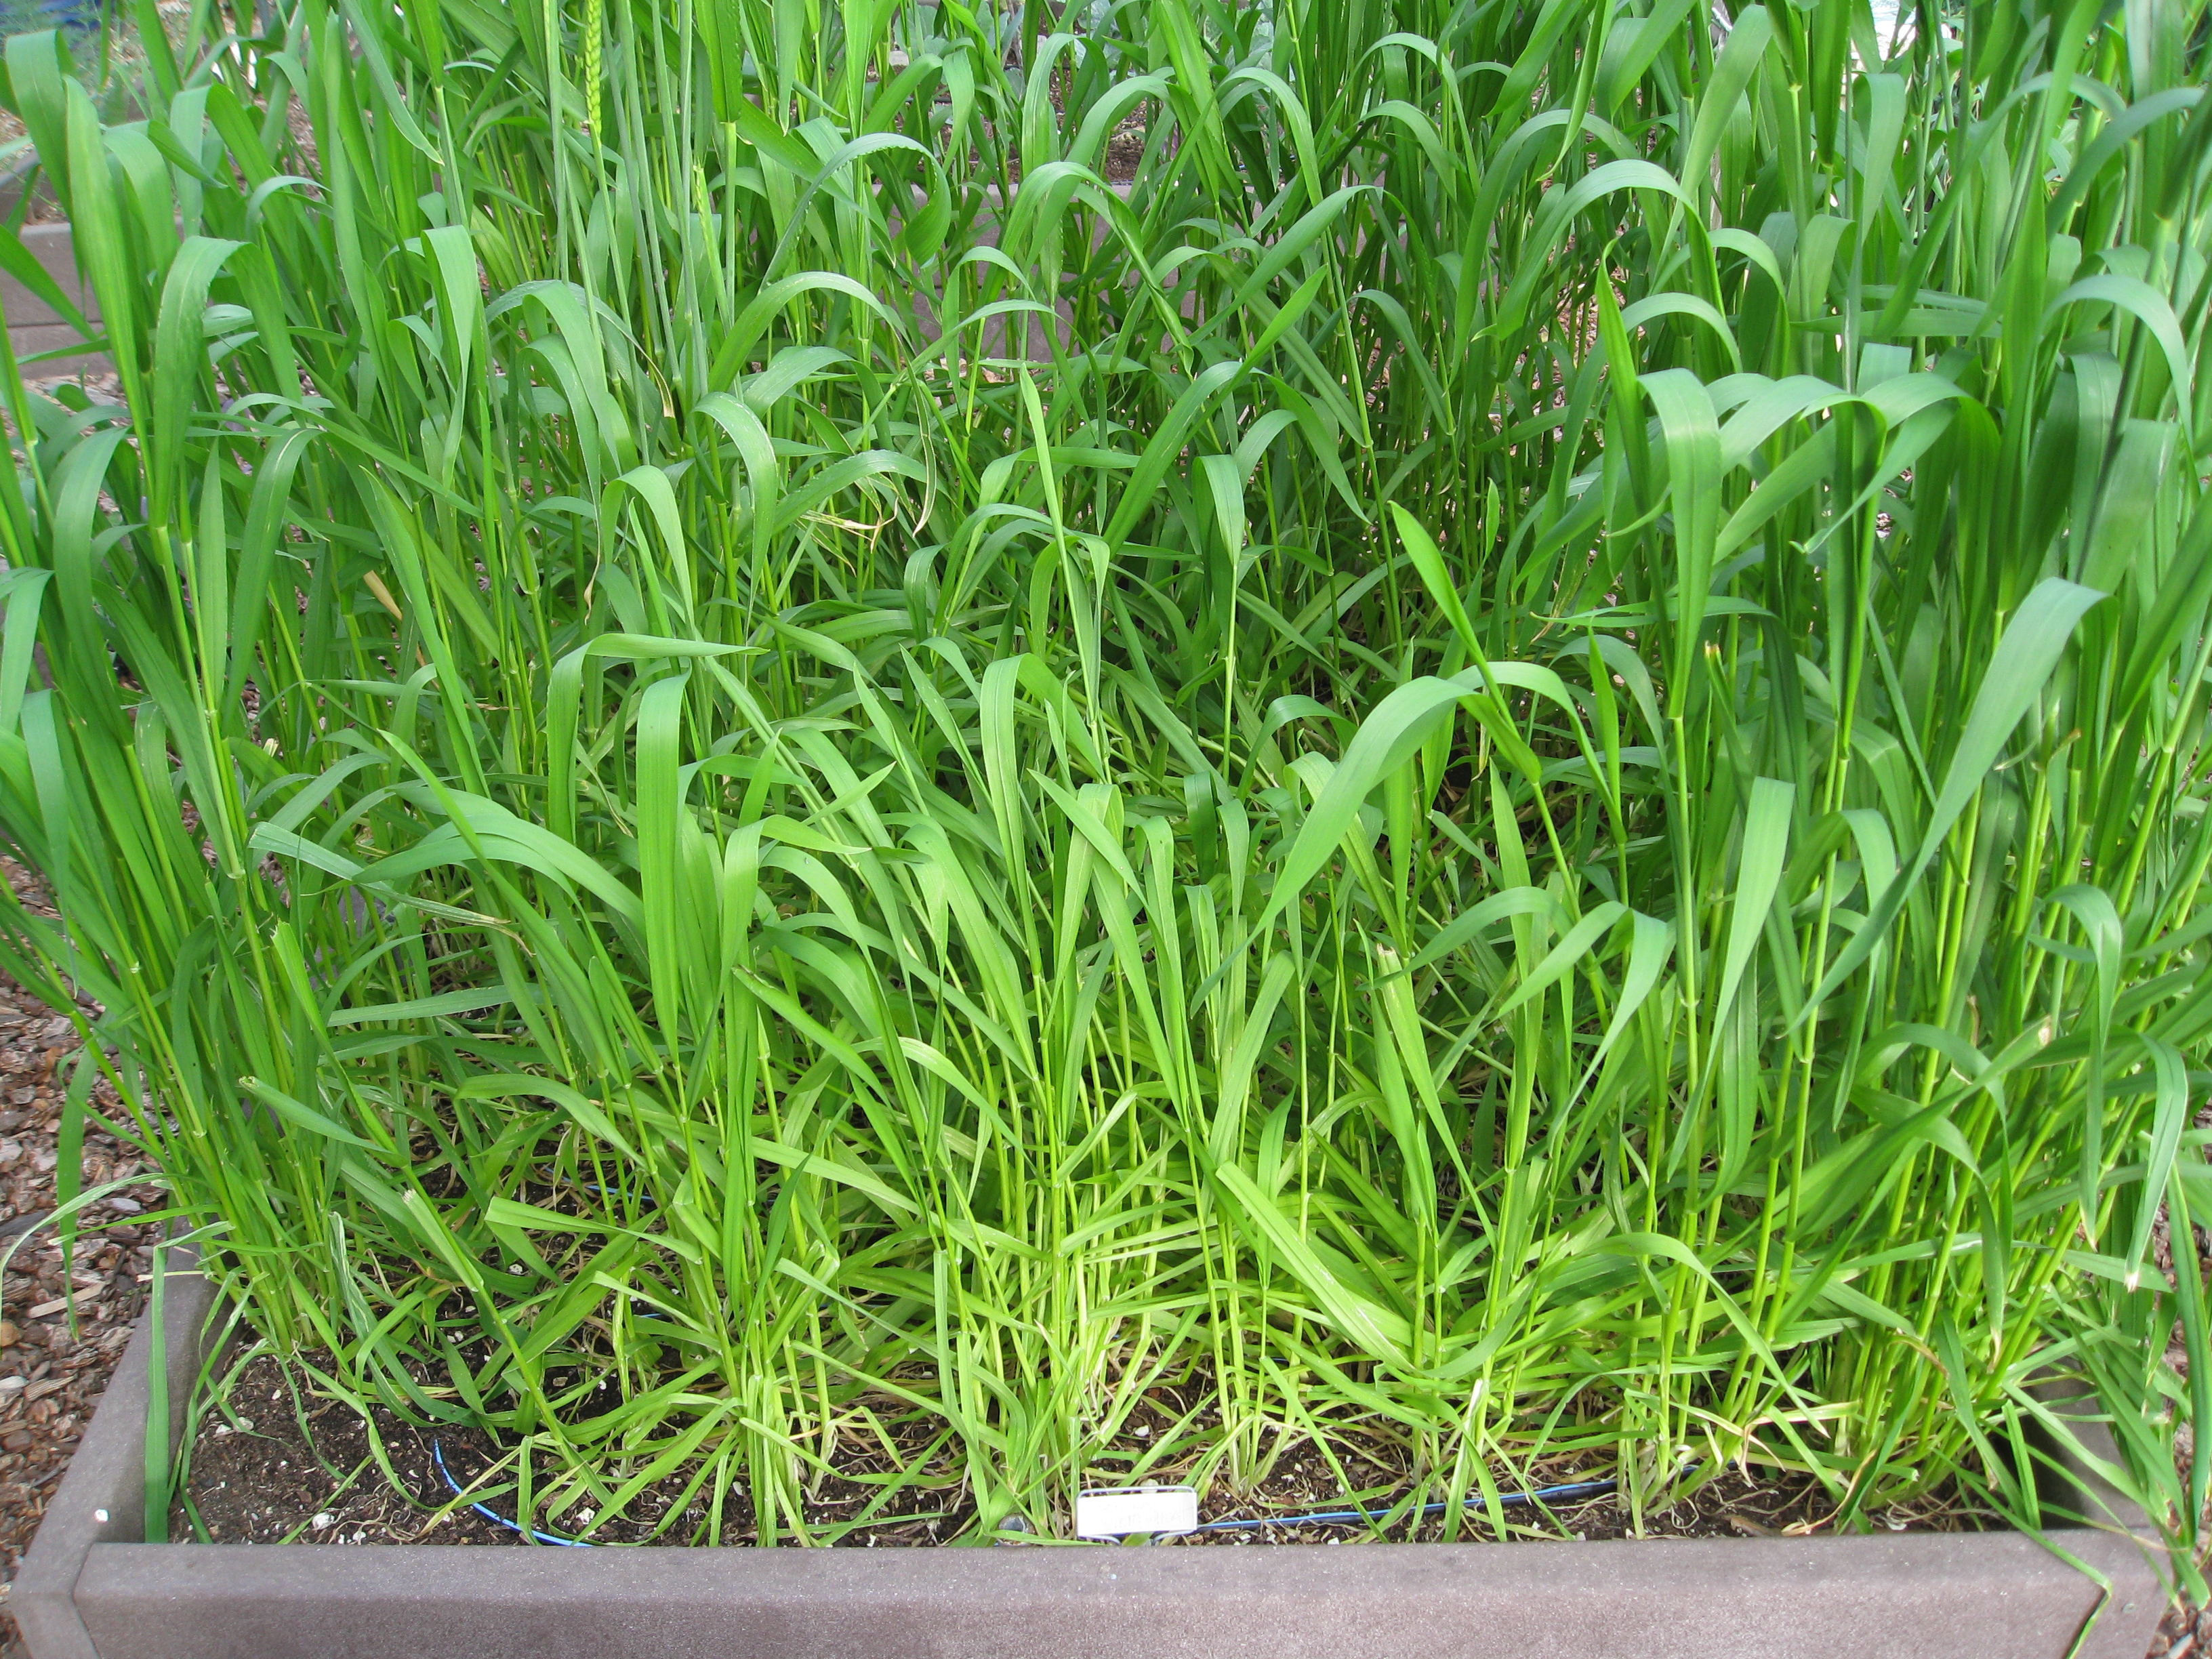 Fallen stalks in the center of the bed indicate over fertilizing. 